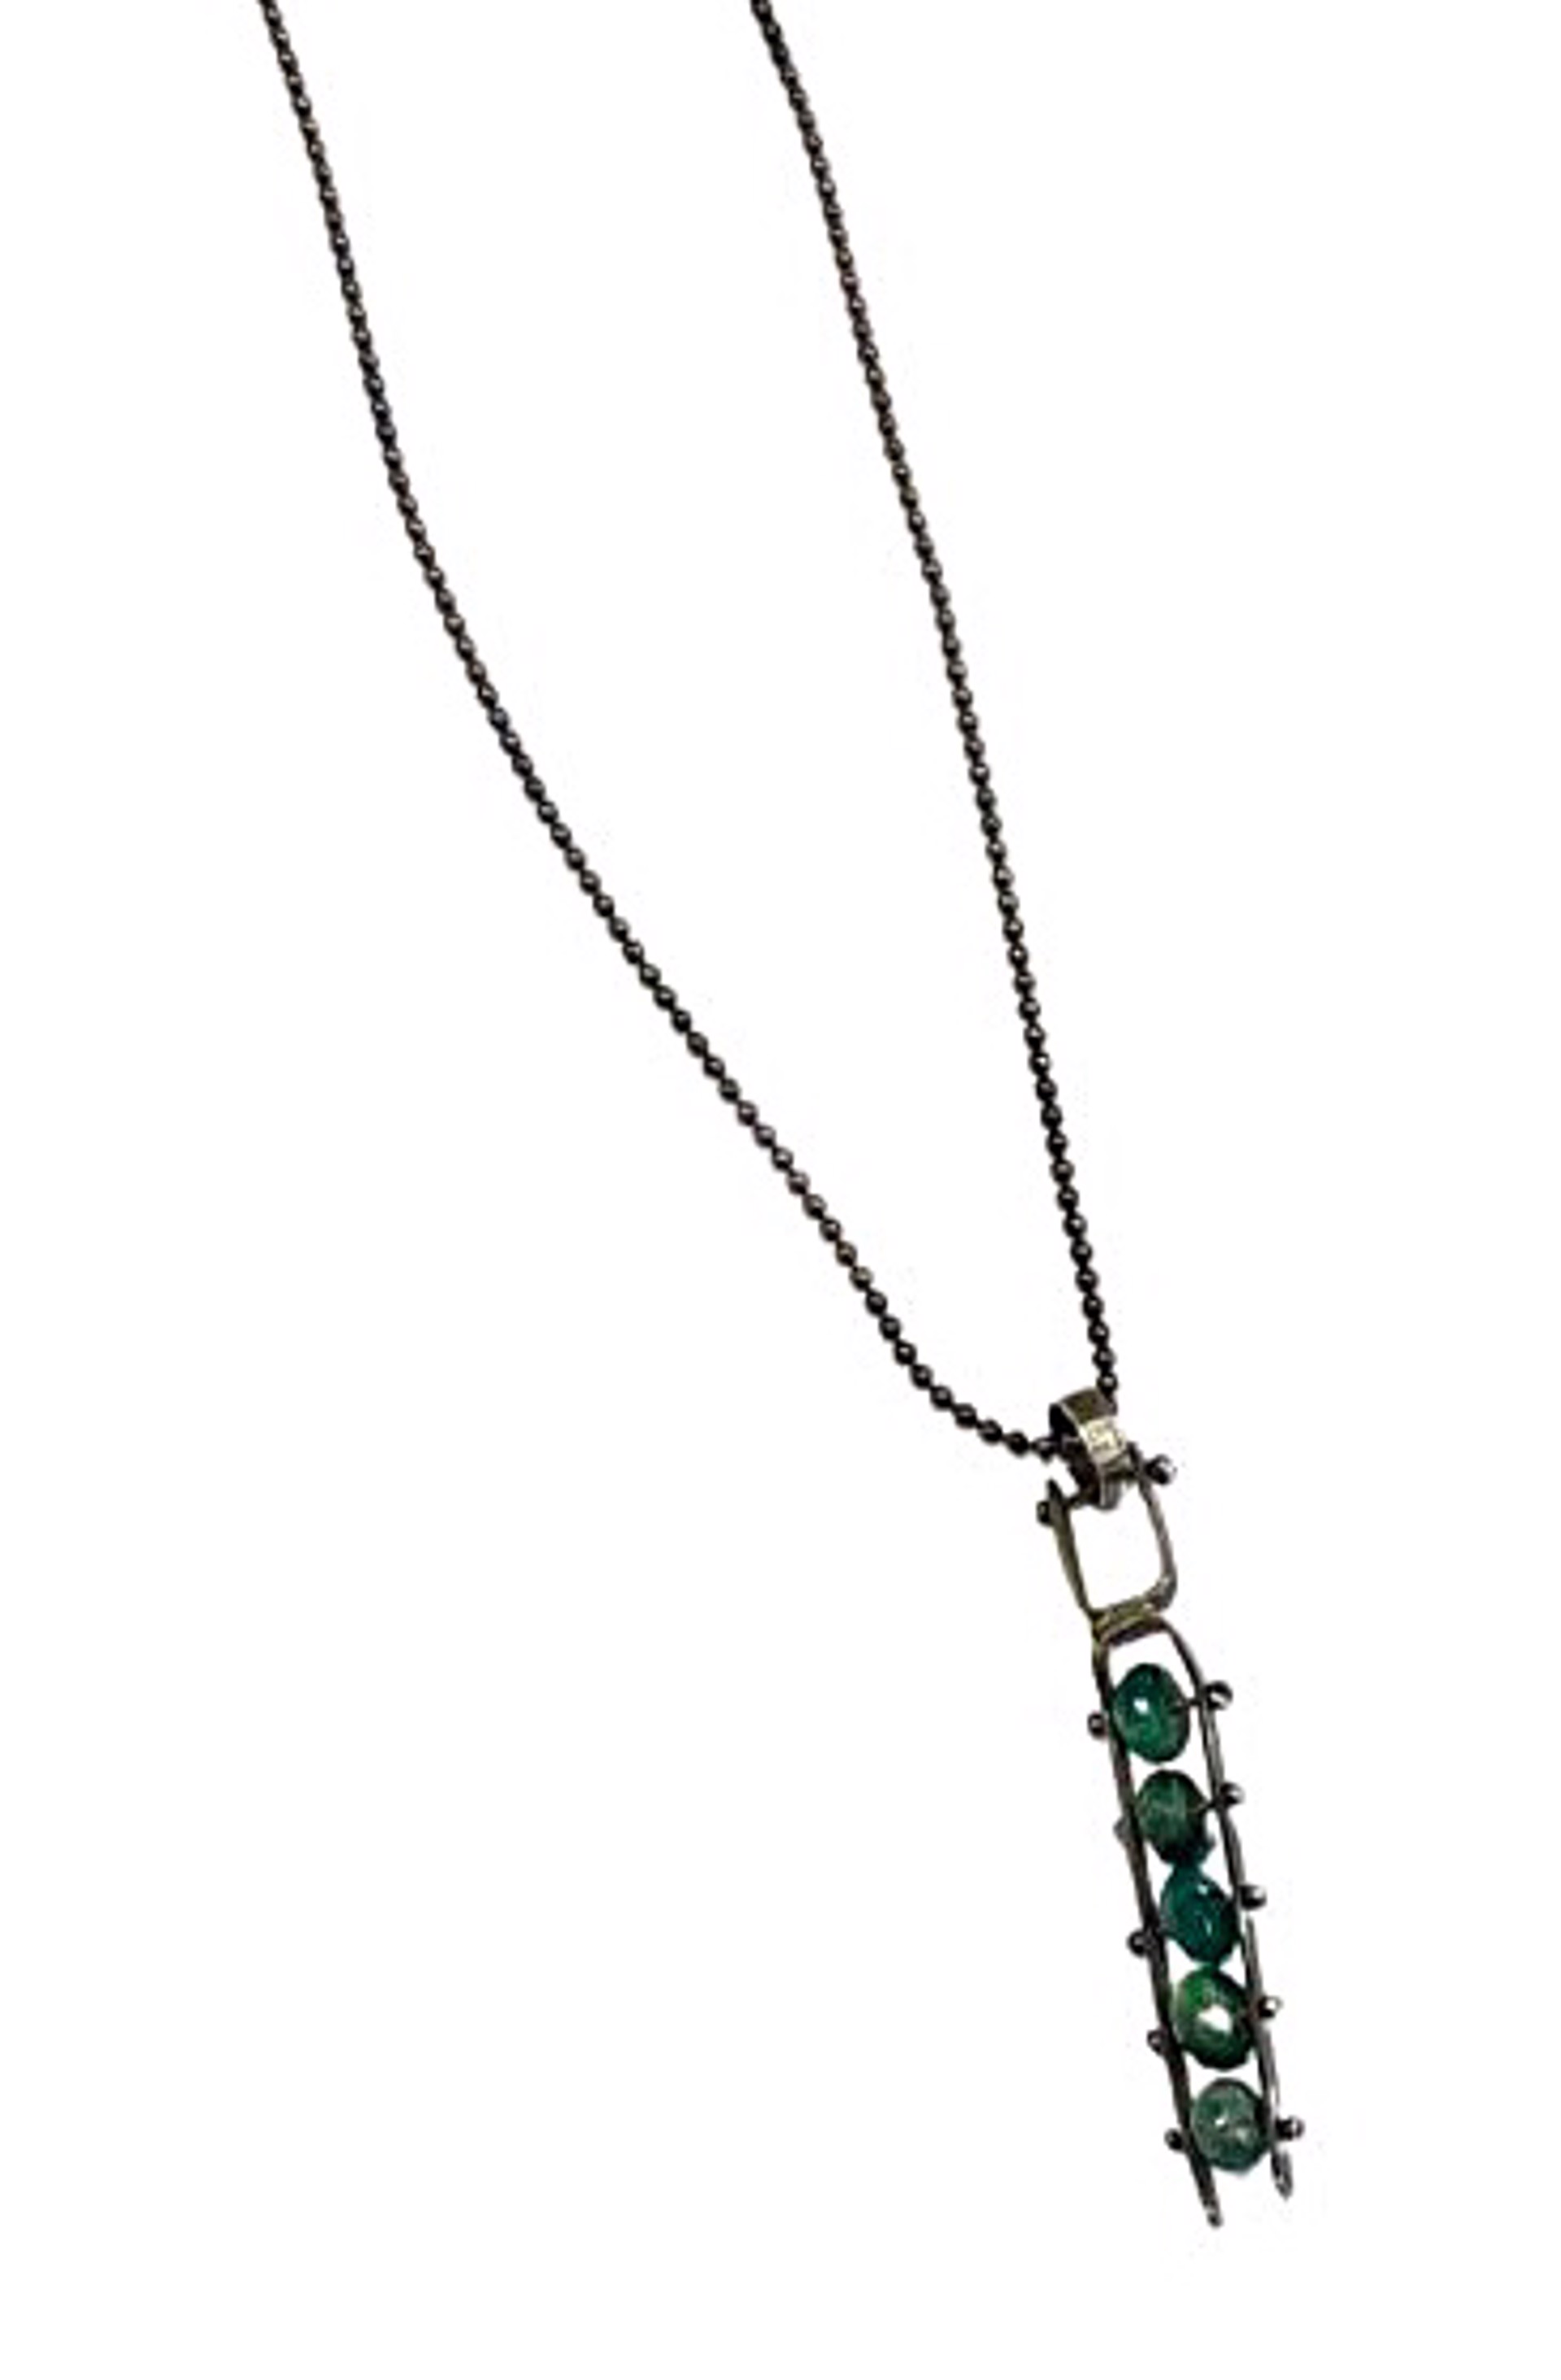 Necklace - Sterling Silver Pendant With Faceted Green Stone. AC 224 by Annette Campbell